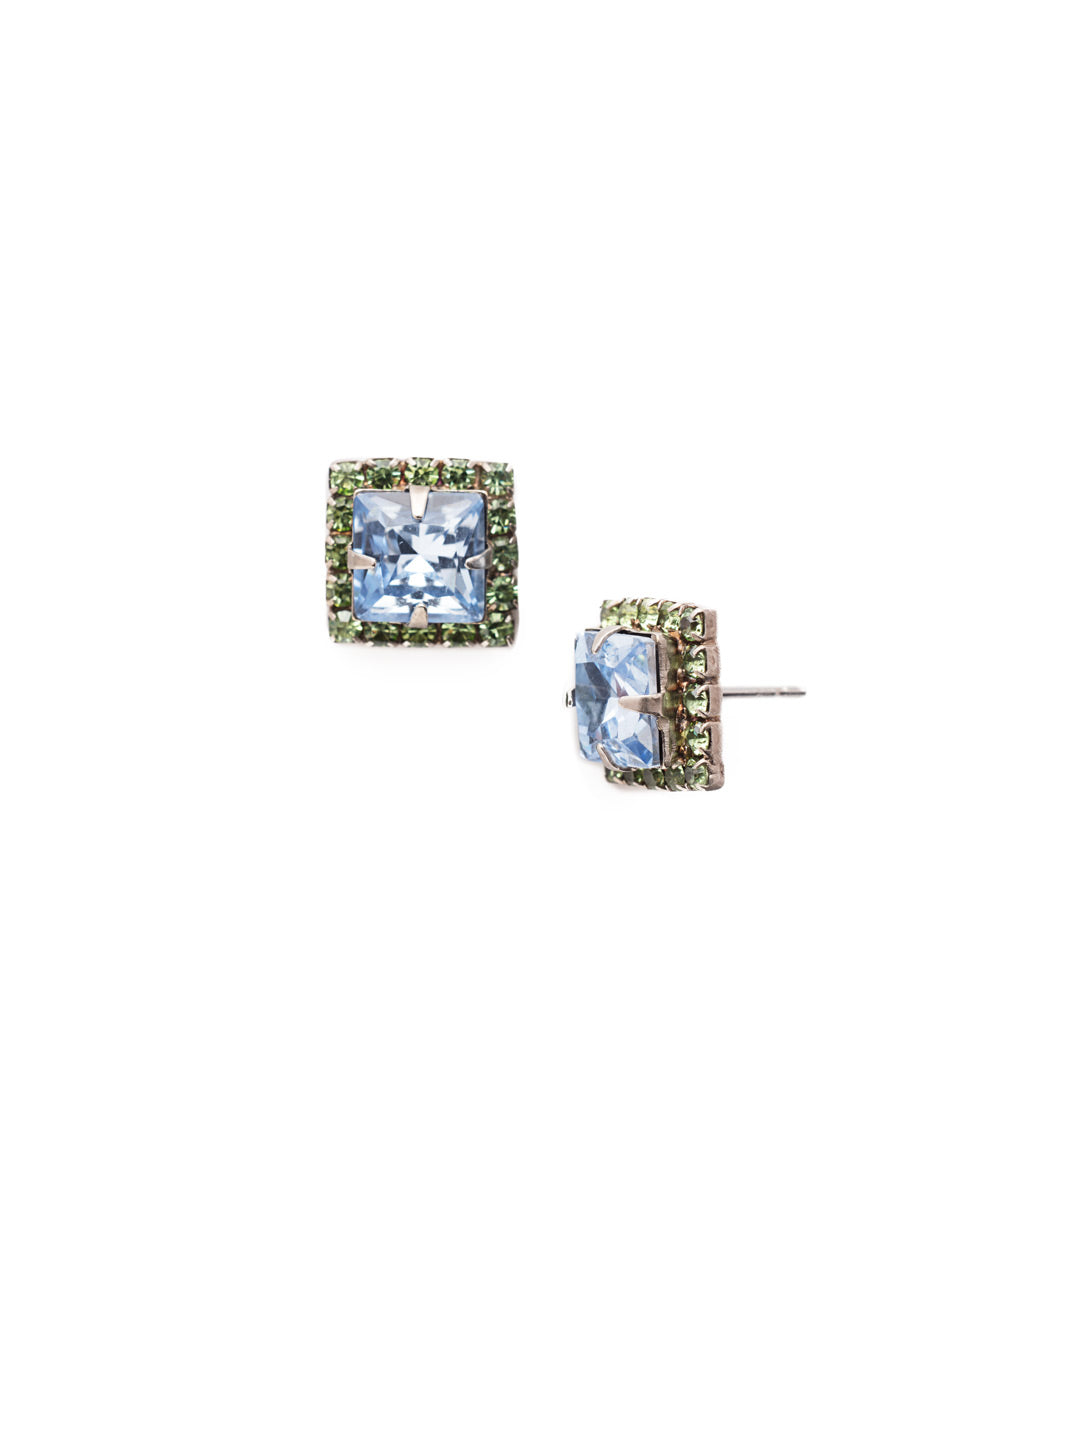 Perfectly Pointed Stud Earrings - ECP9ASBWB - <p>These posts are a staple in any leading lady's jewelry box. Simple, yet stunning, you'll have heads turning and minds wondering where you got those gems. From Sorrelli's Bluewater Breeze collection in our Antique Silver-tone finish.</p>